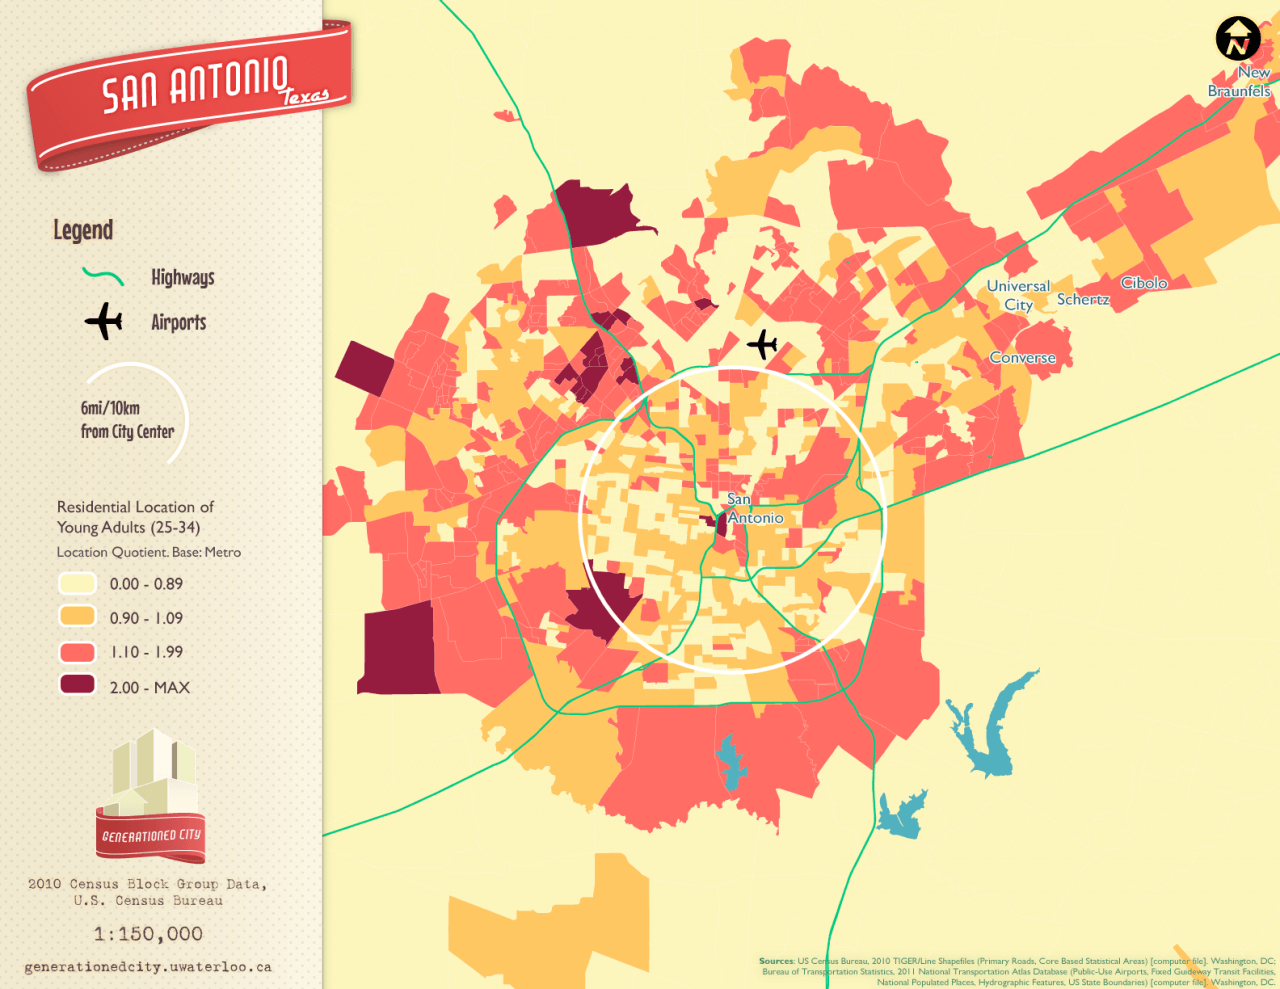 Residential location of young adults in San Antonio.